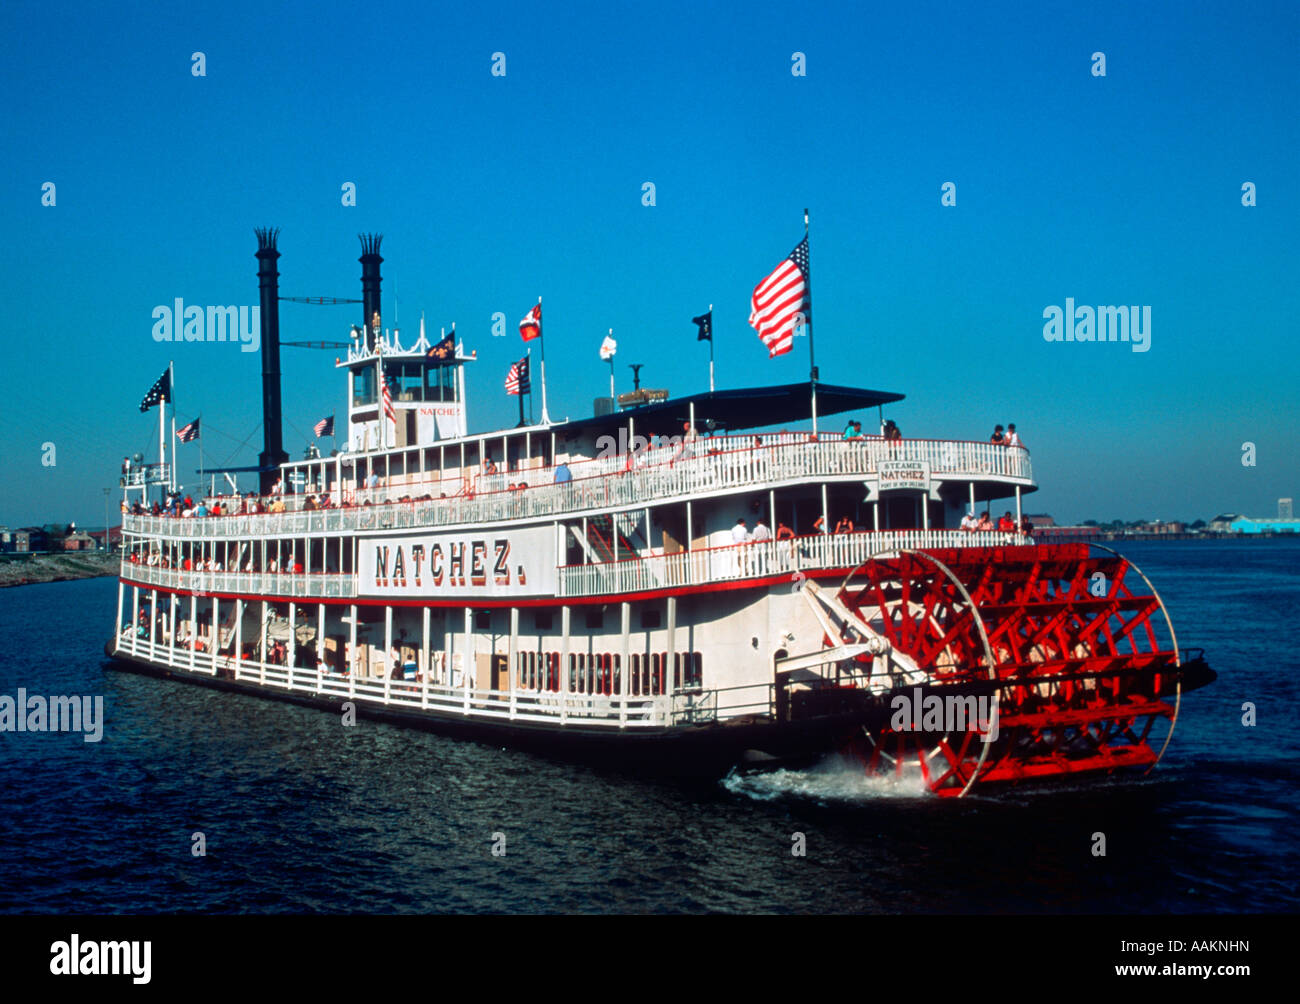 THE PADDLE WHEEL BOAT THE NATCHEZ IN MISSISSIPPI RIVER AT 